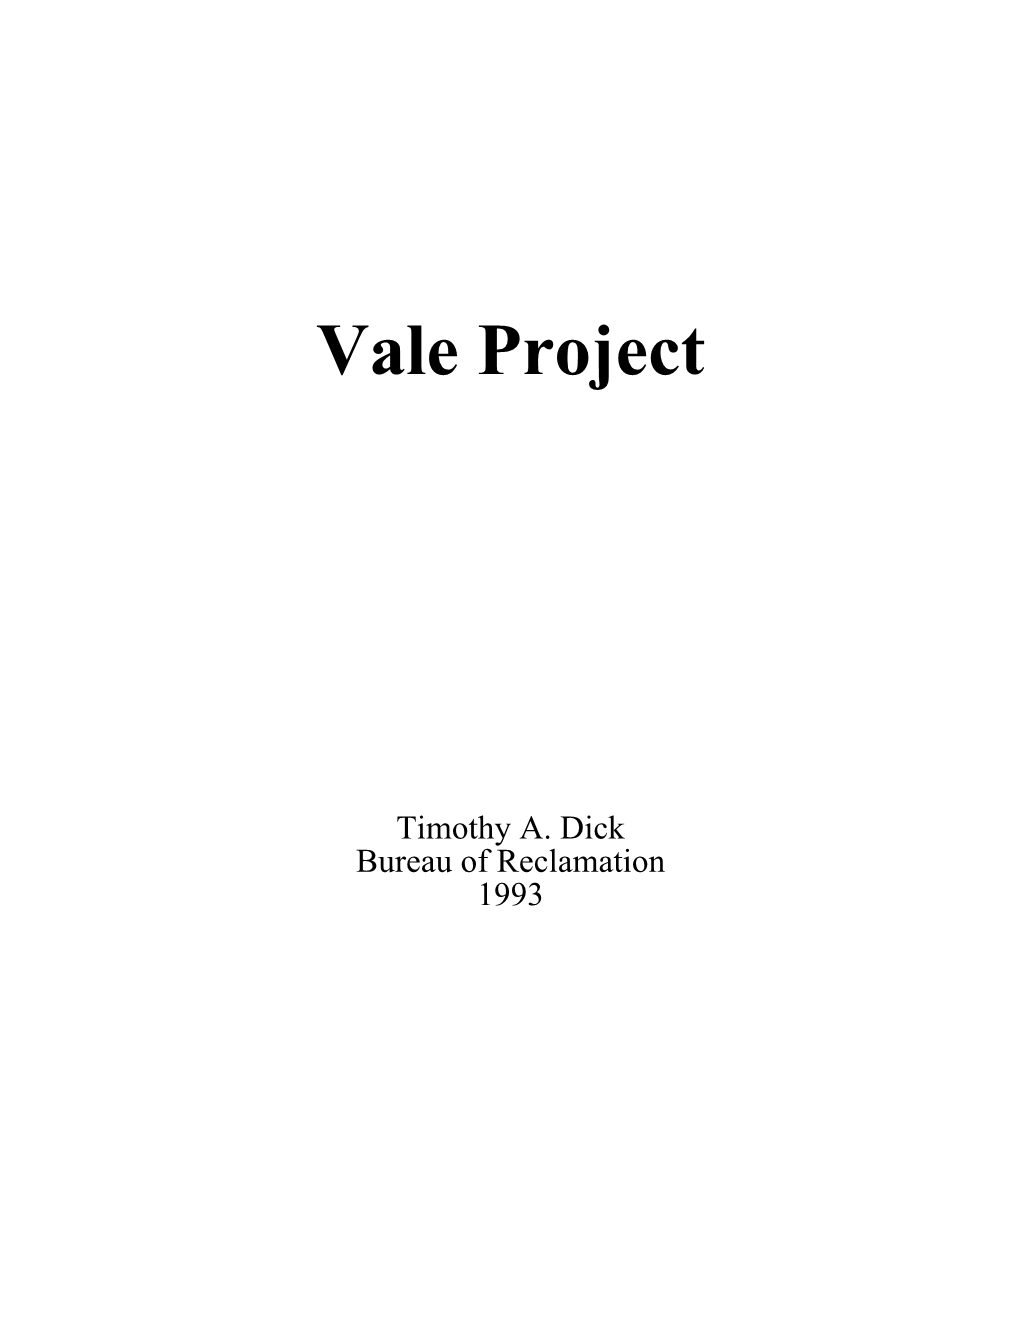 Vale Project History